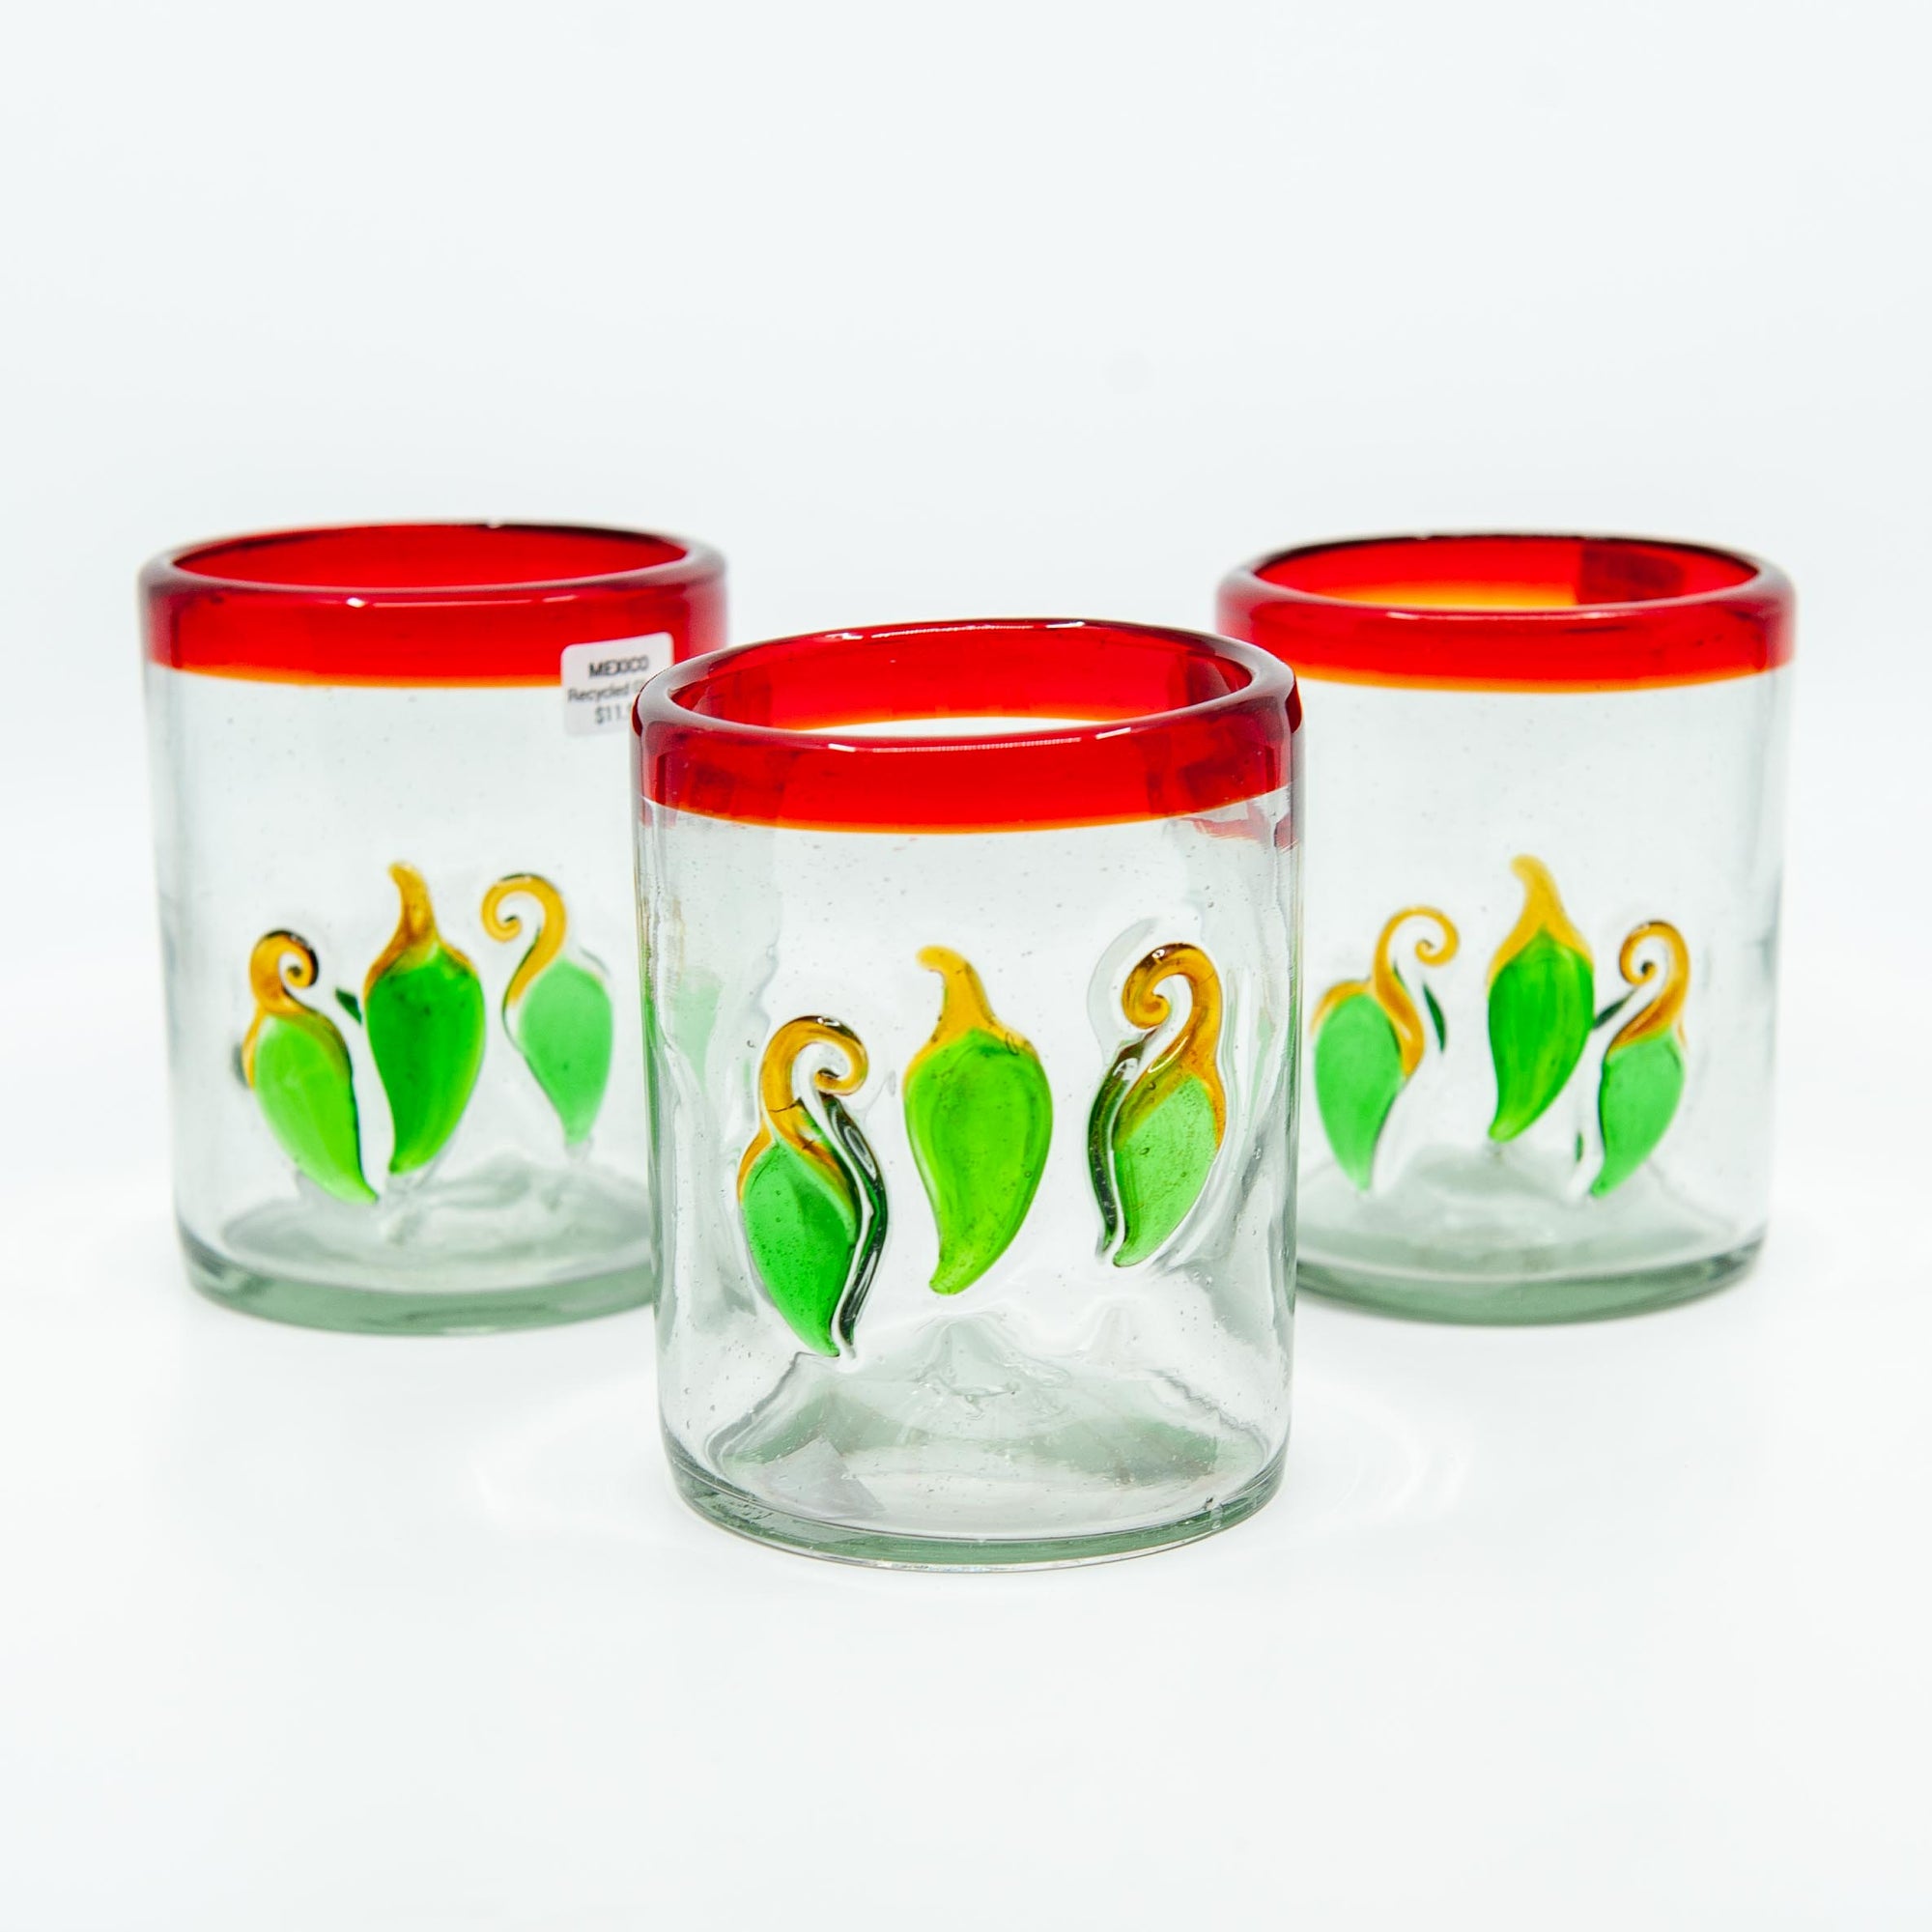 Mexican Tumbler - Red Rim, Green Chillies - 4"